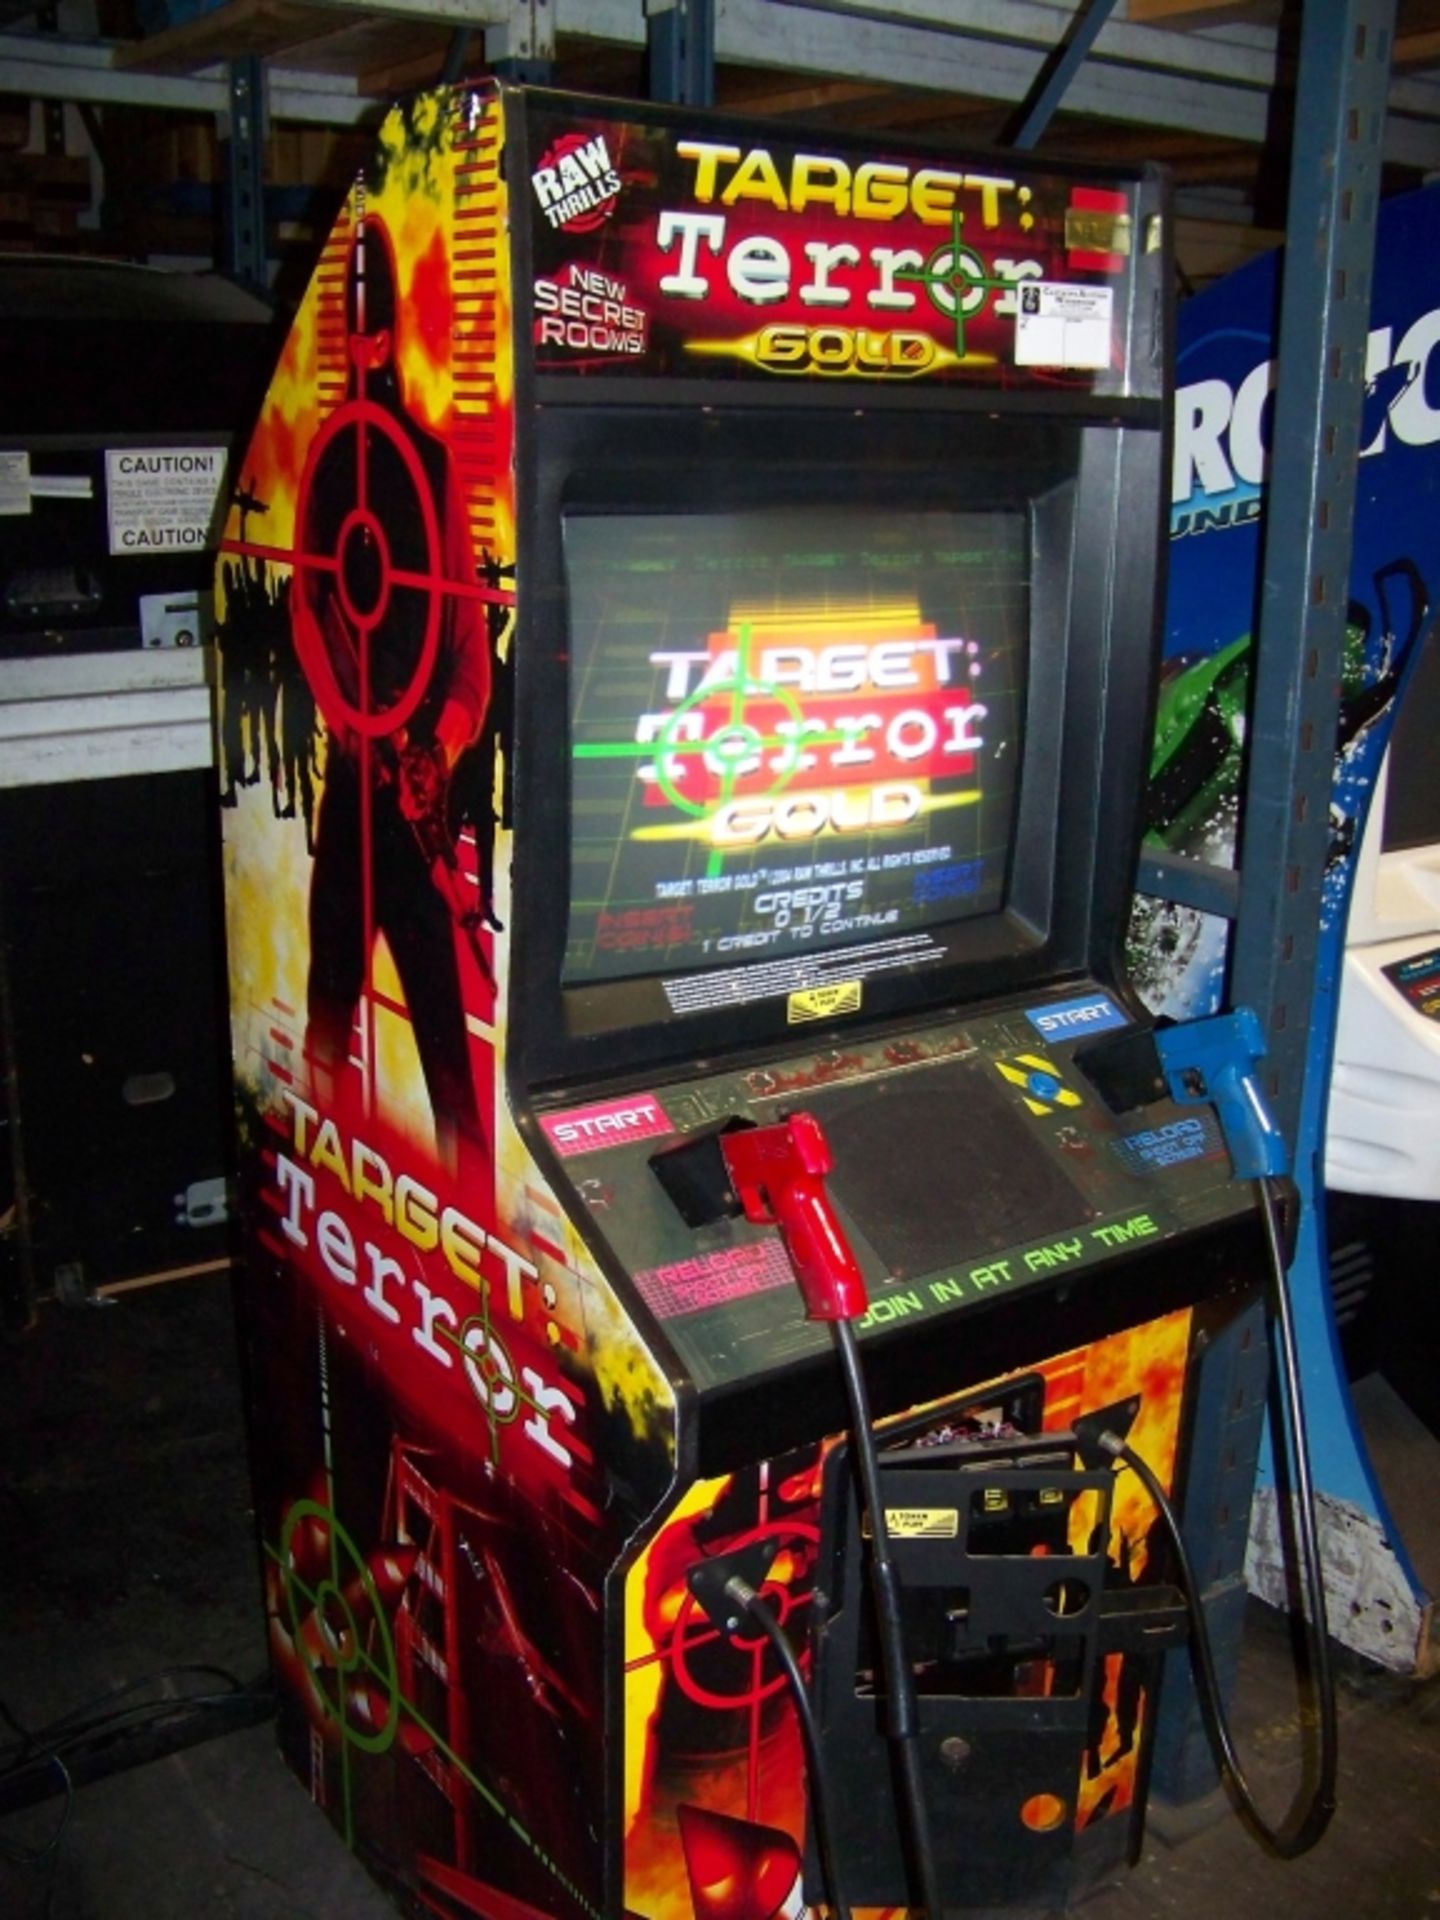 TARGET TERROR GOLD DEDICATED SHOOTER ARCADE GAME Item is in used condition. Evidence of wear and - Image 4 of 4